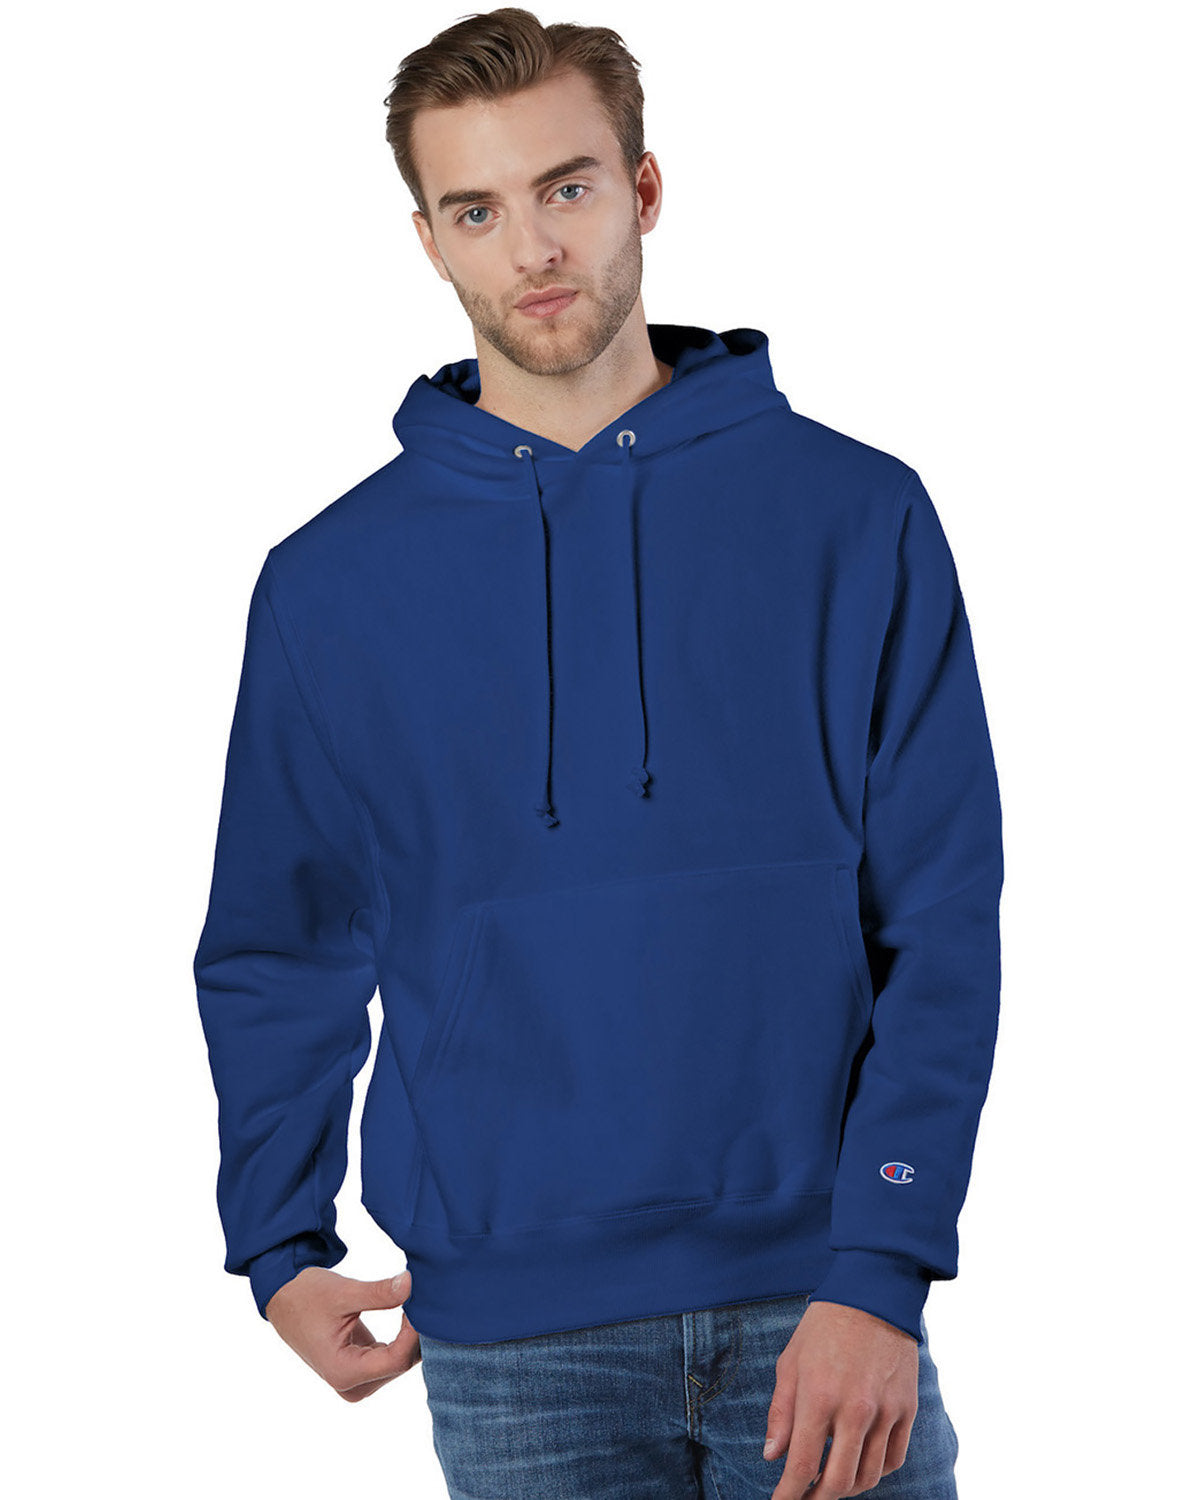 Champion S1051 Reverse Weave Pullover Hooded Sweatshirt - Shop Now